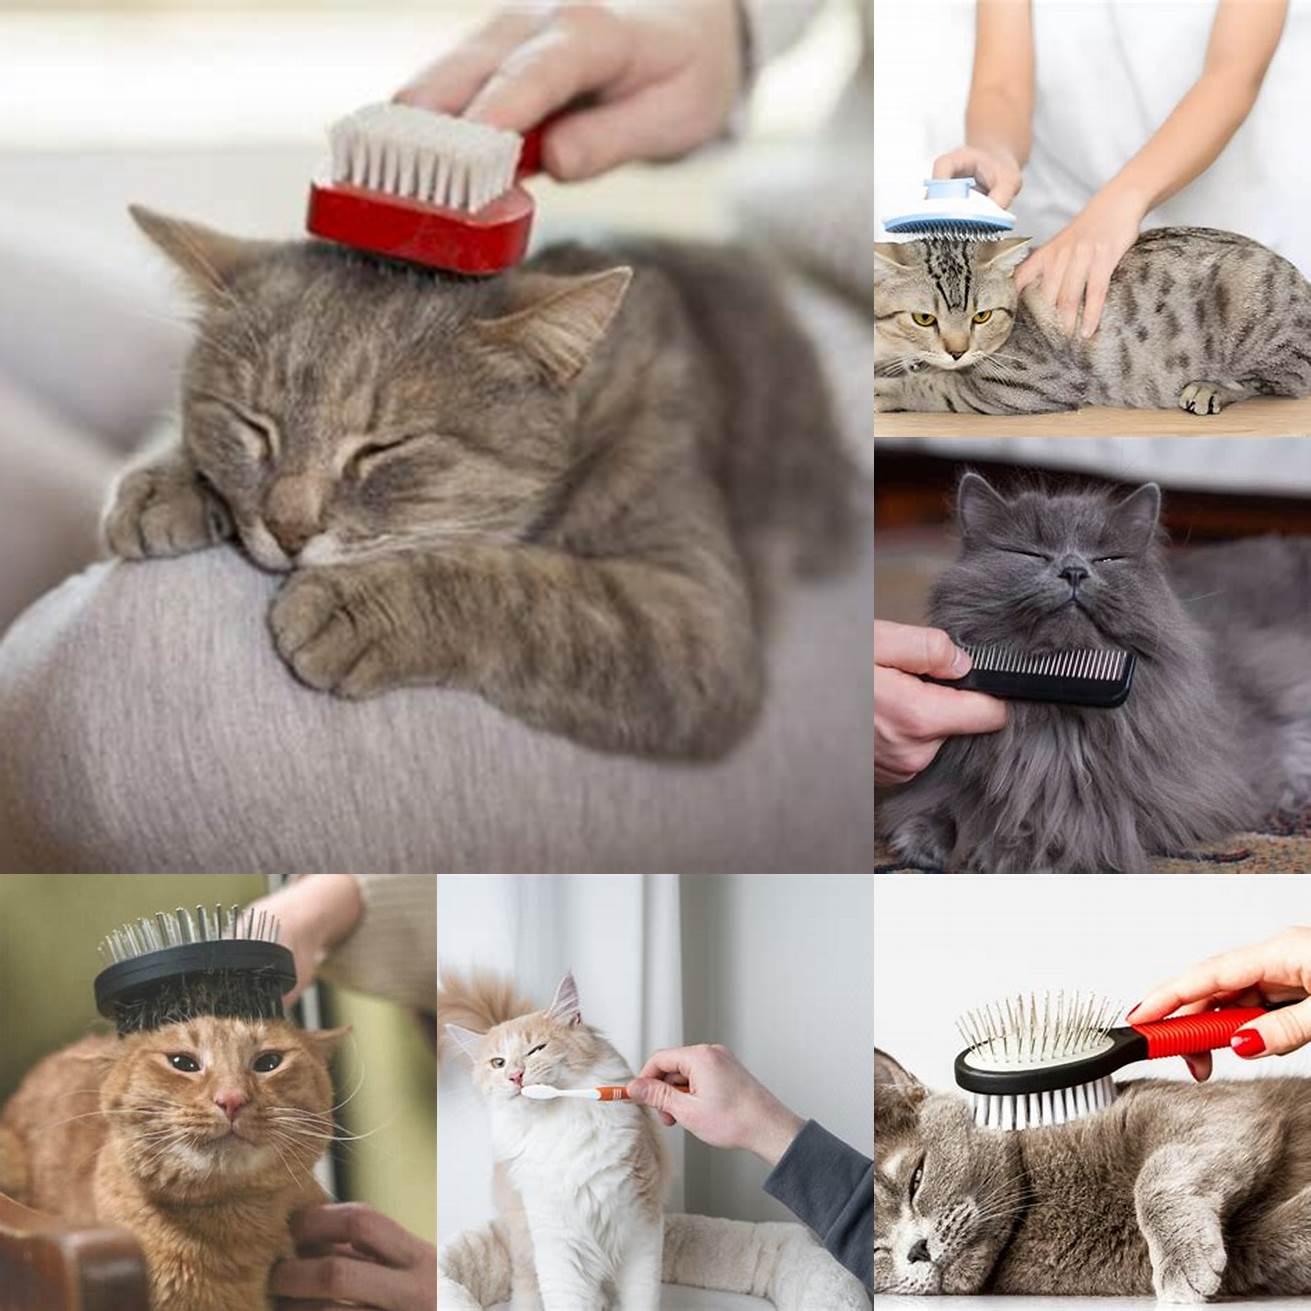 1 Brush your cats fur